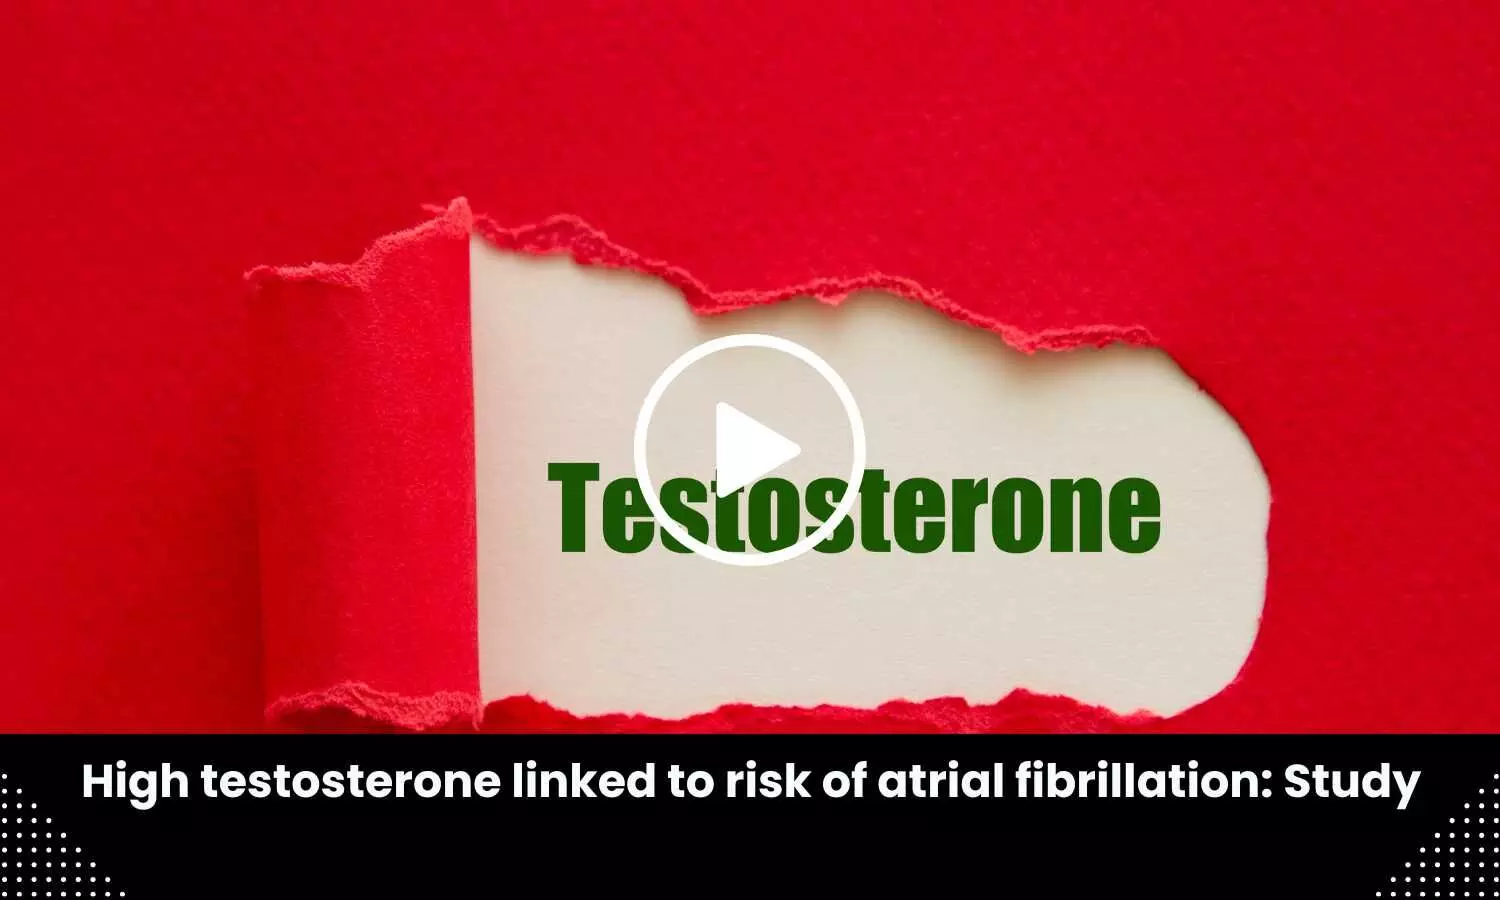 High testosterone linked to risk of atrial fibrillation: Study